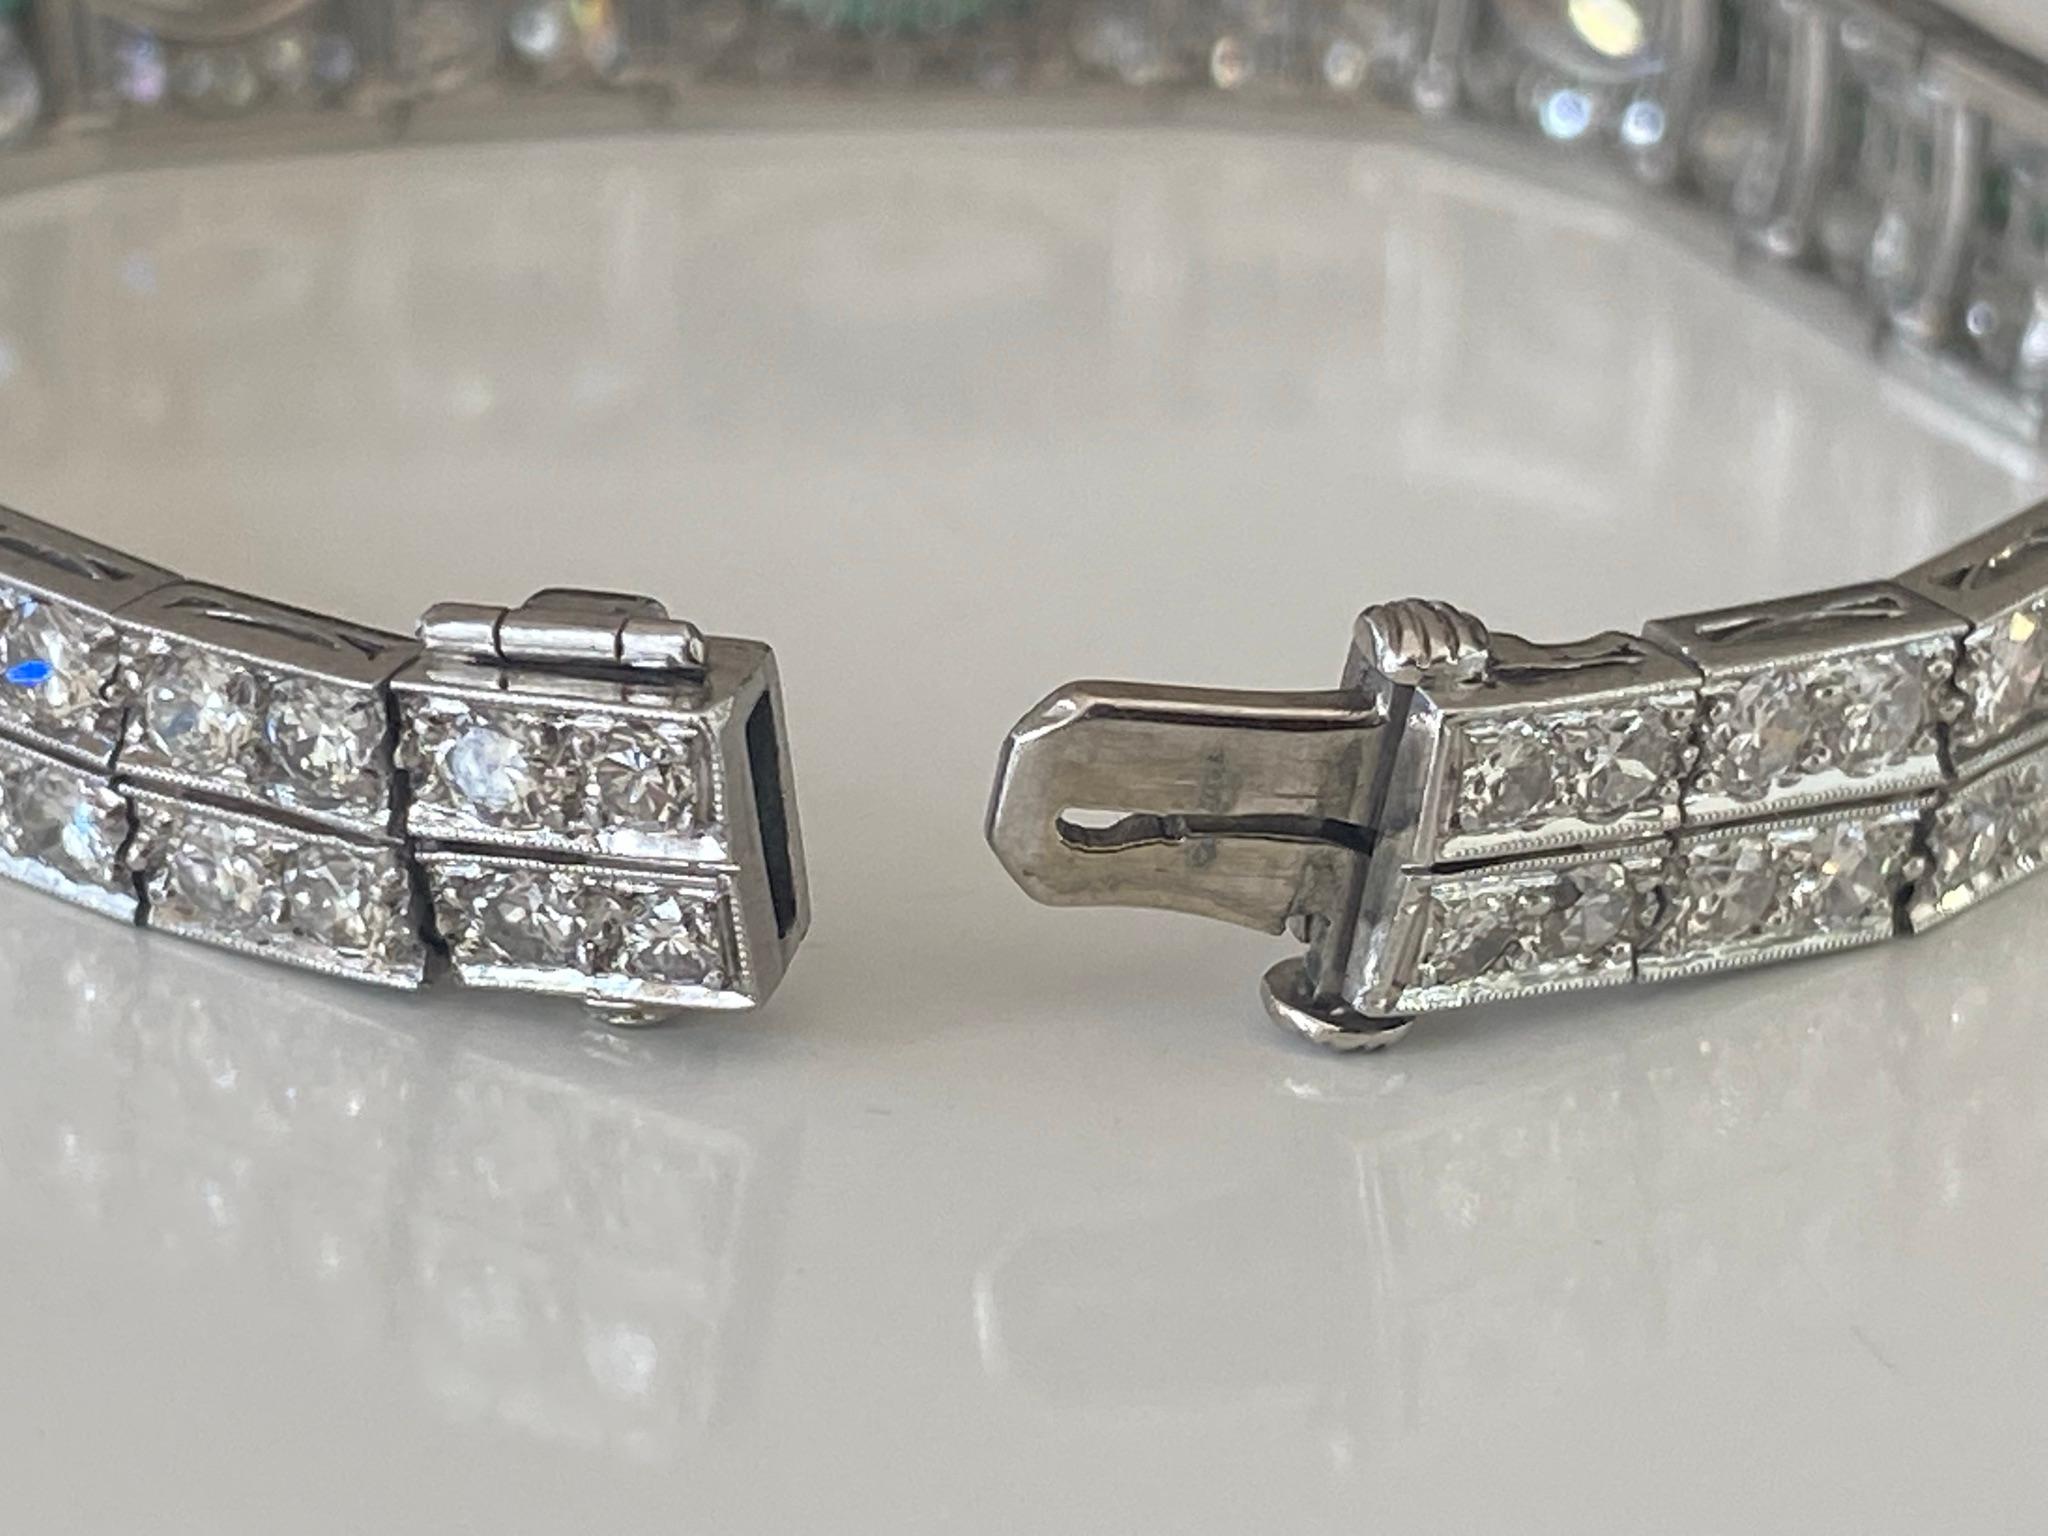 Crafted in the 1920s from platinum, this stunning Art Deco bracelet features three bezel-set marquise diamonds (the center stone measures 0.60 carats) surrounded by an array of glistening Old European cut diamonds and accented with calibre emeralds